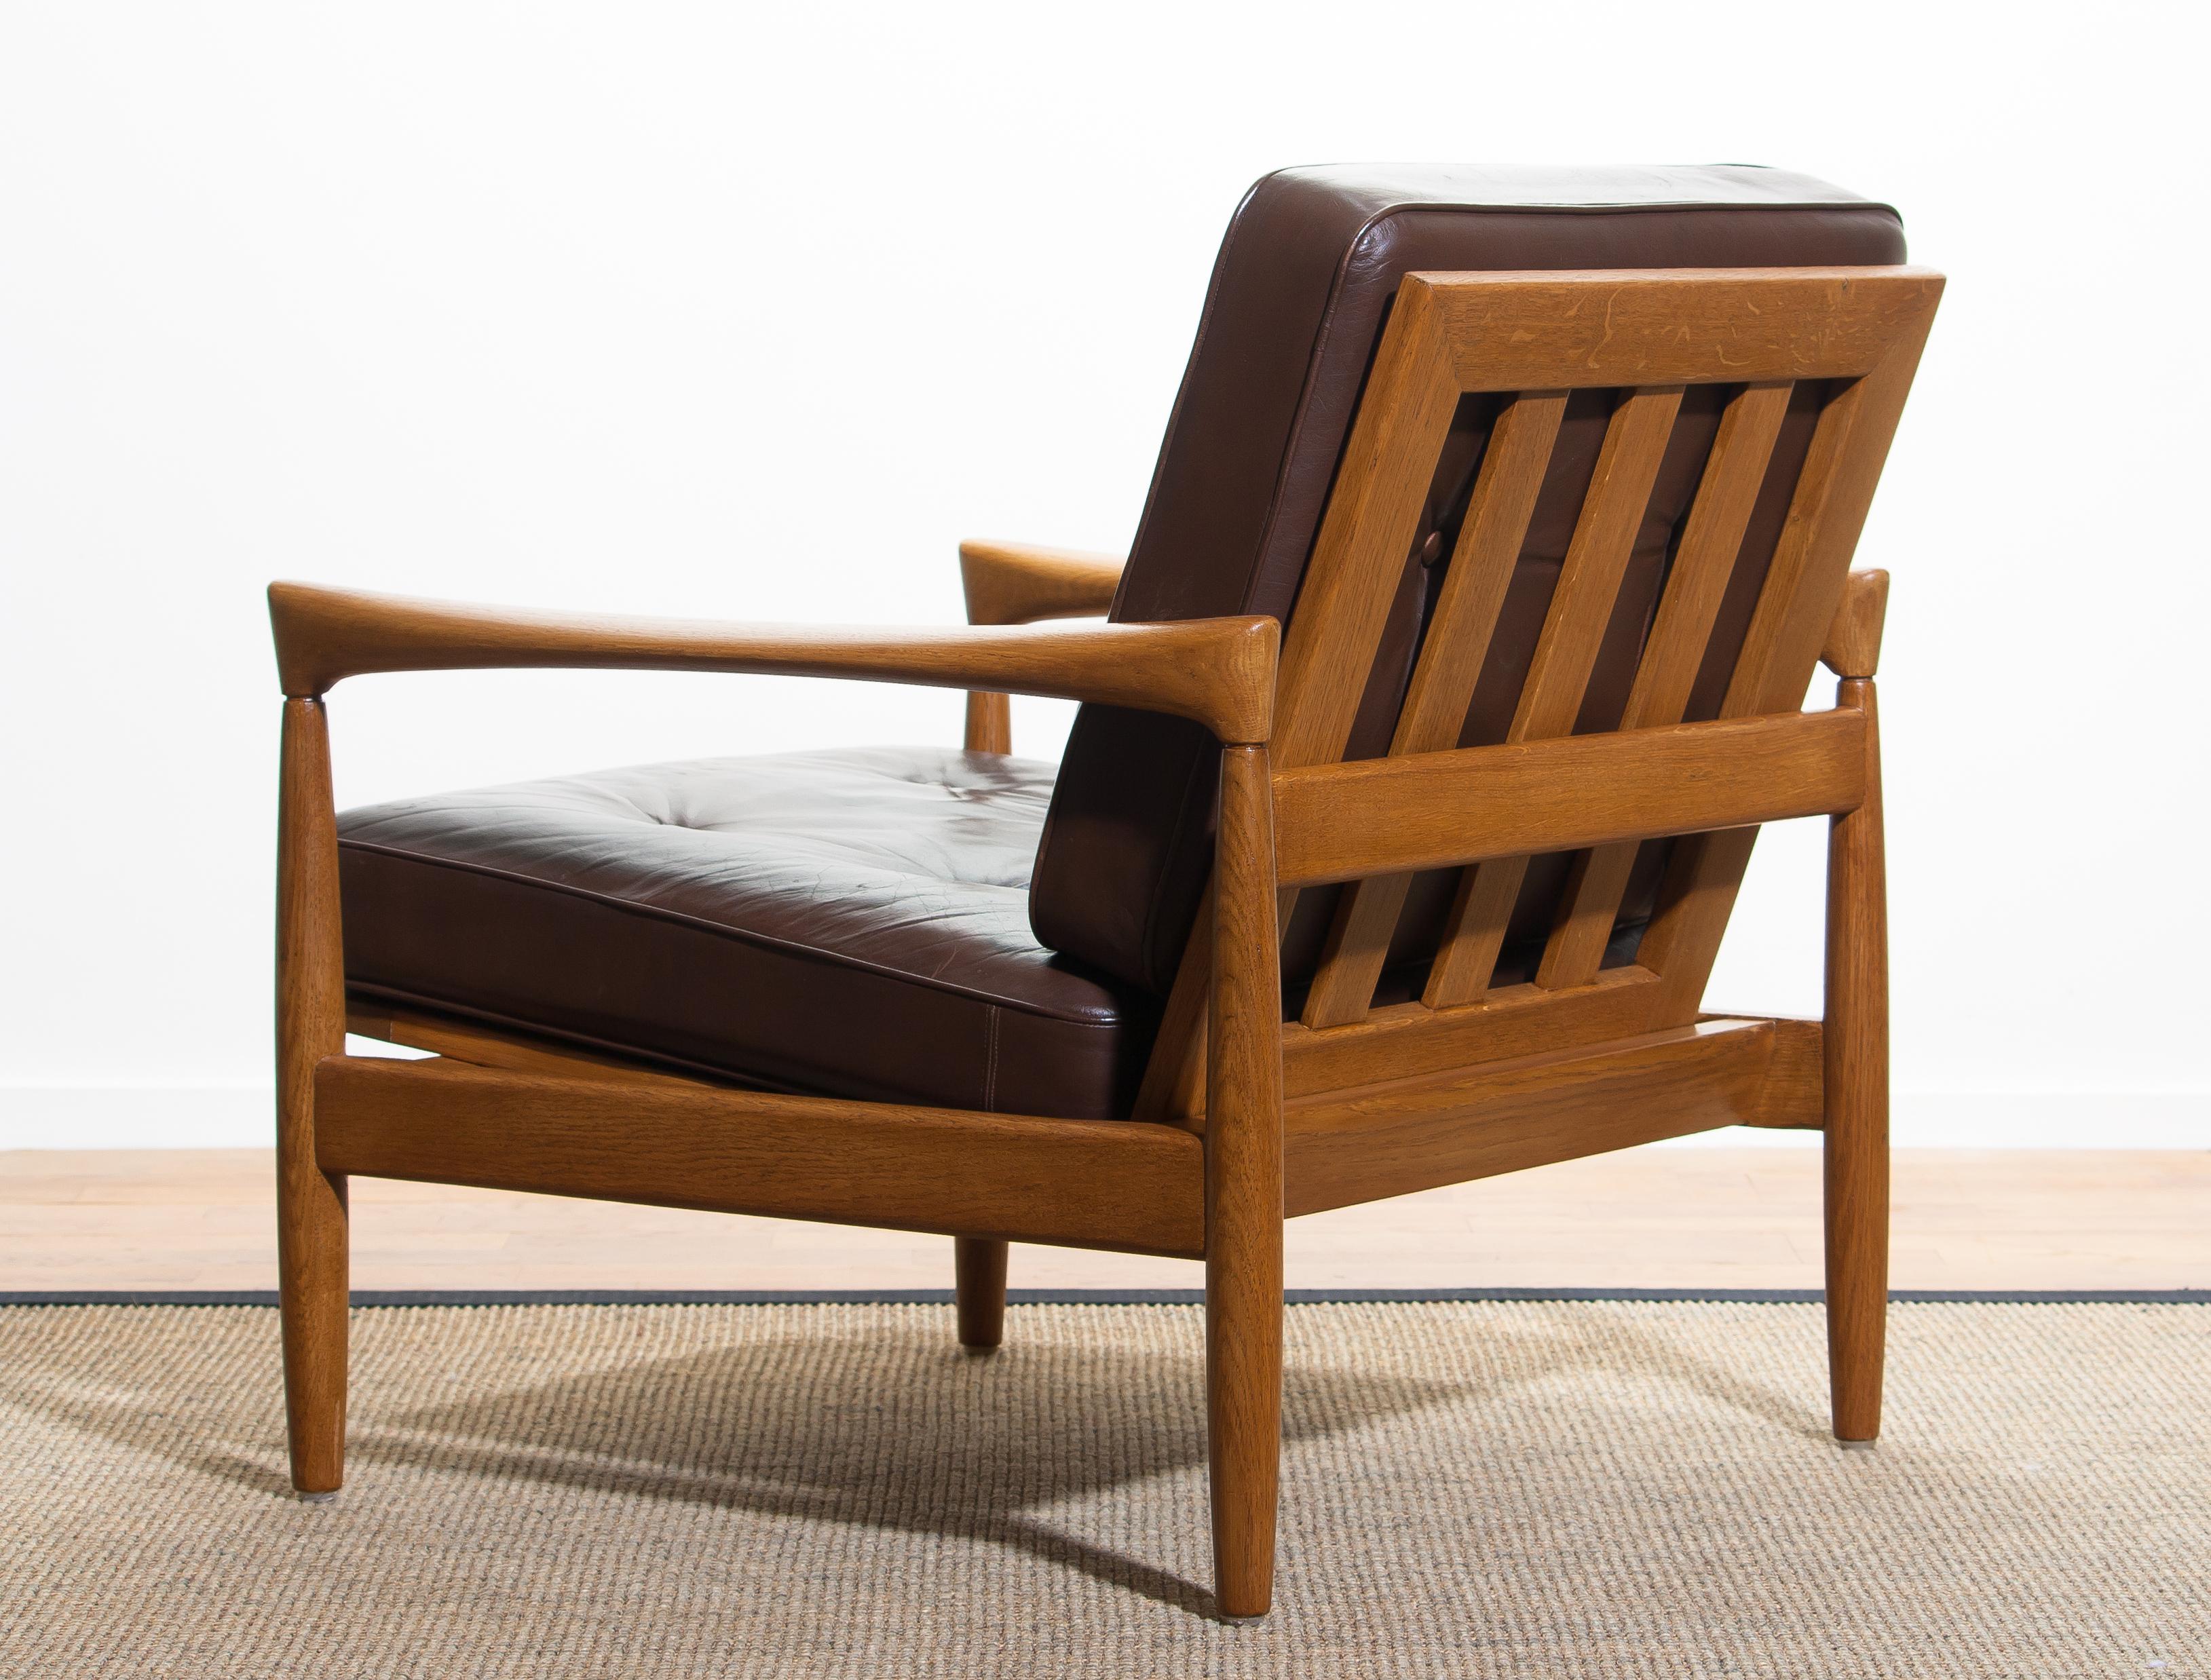 1960s, Oak With Brown Leather Lounge Chair by Erik Wörtz for Bröderna Anderssons 5